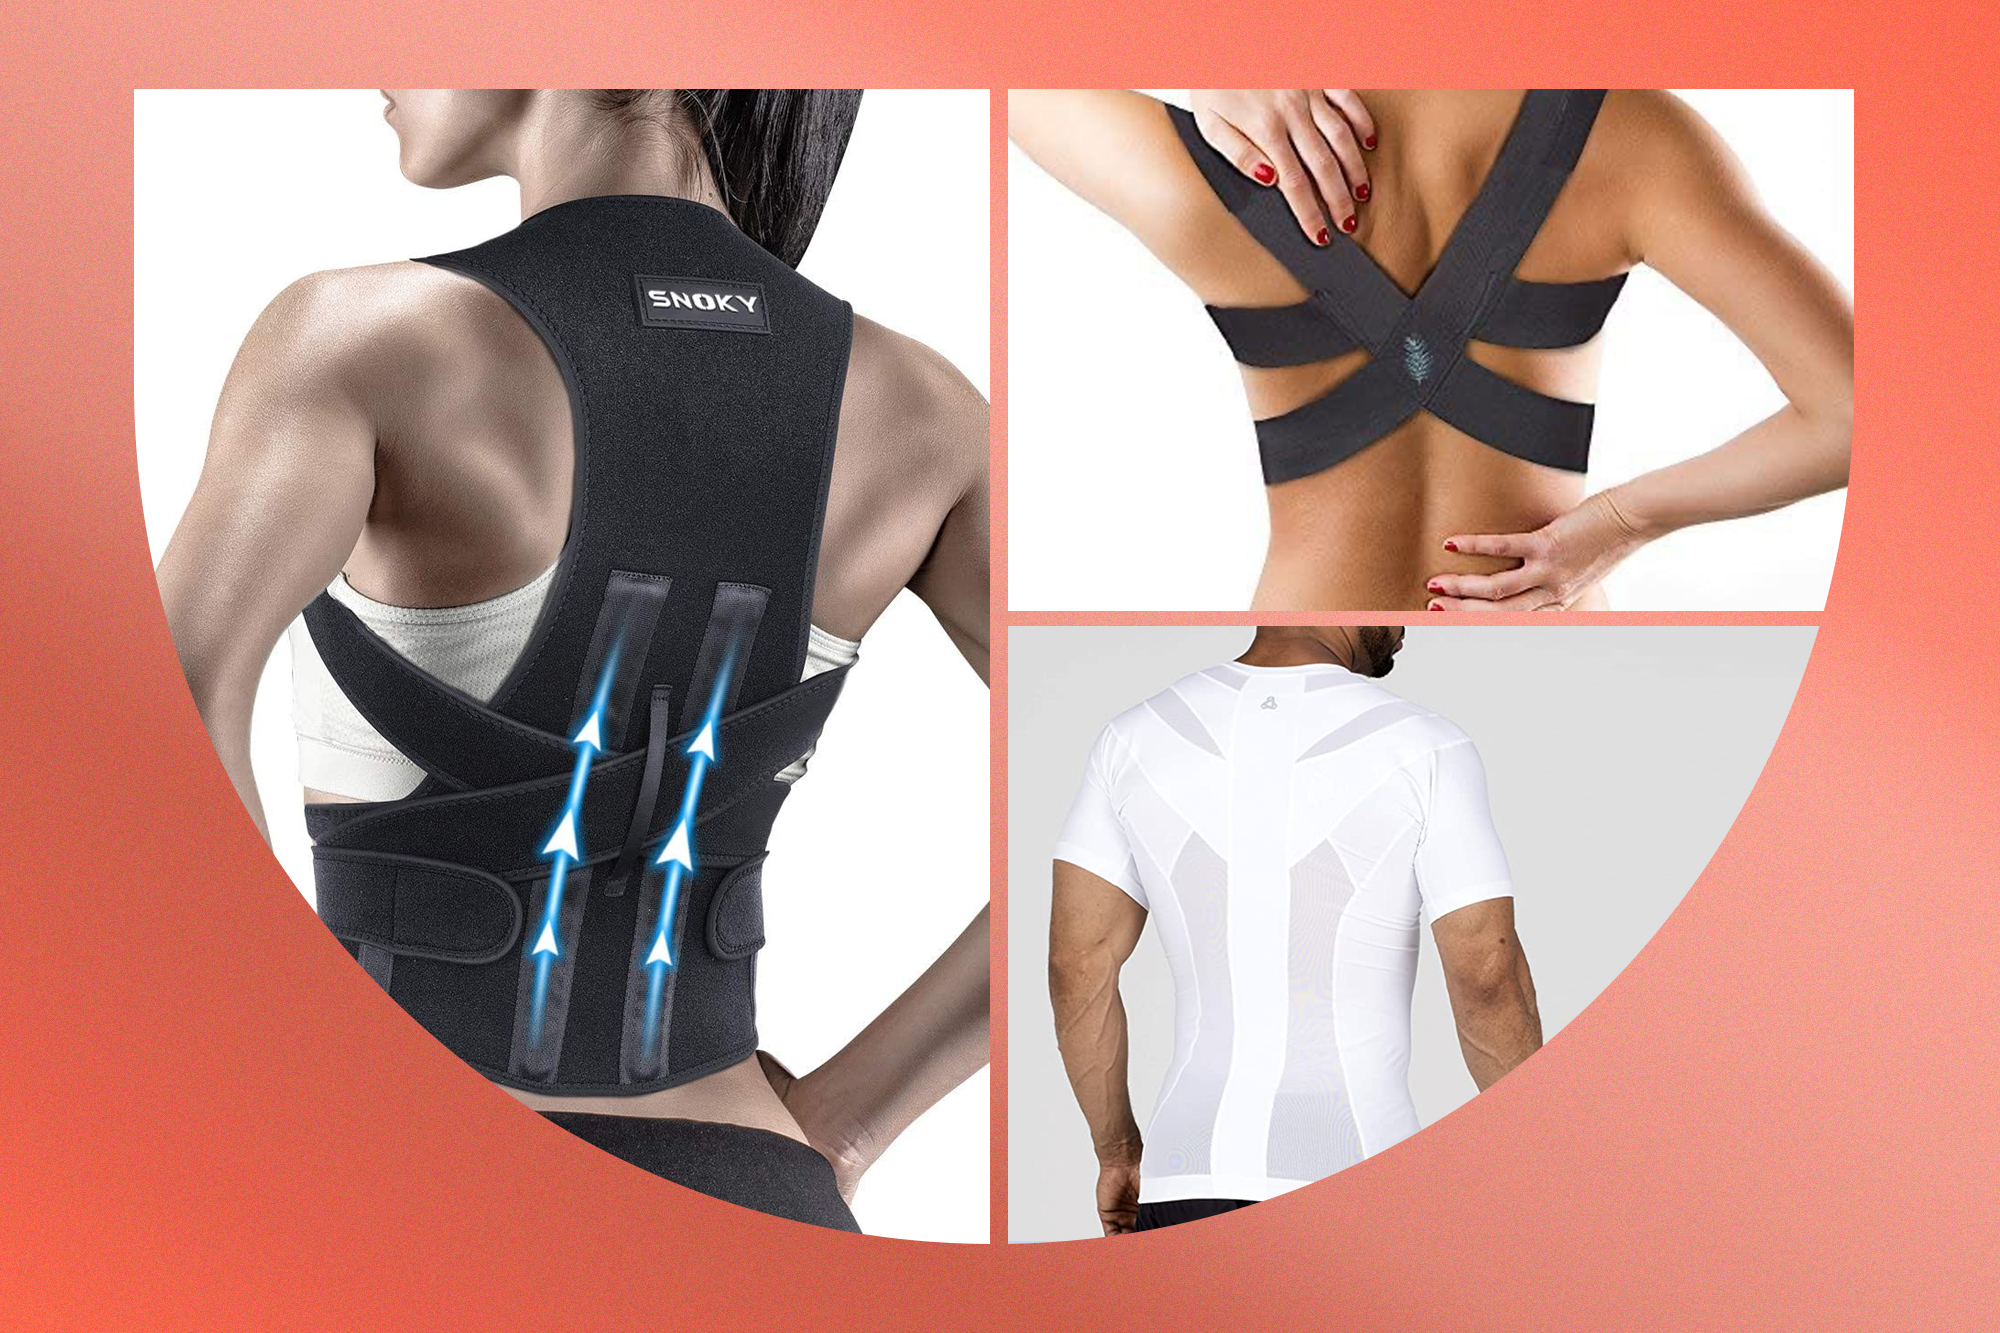 Posture Correction, Get Experts Support for Posture Correction